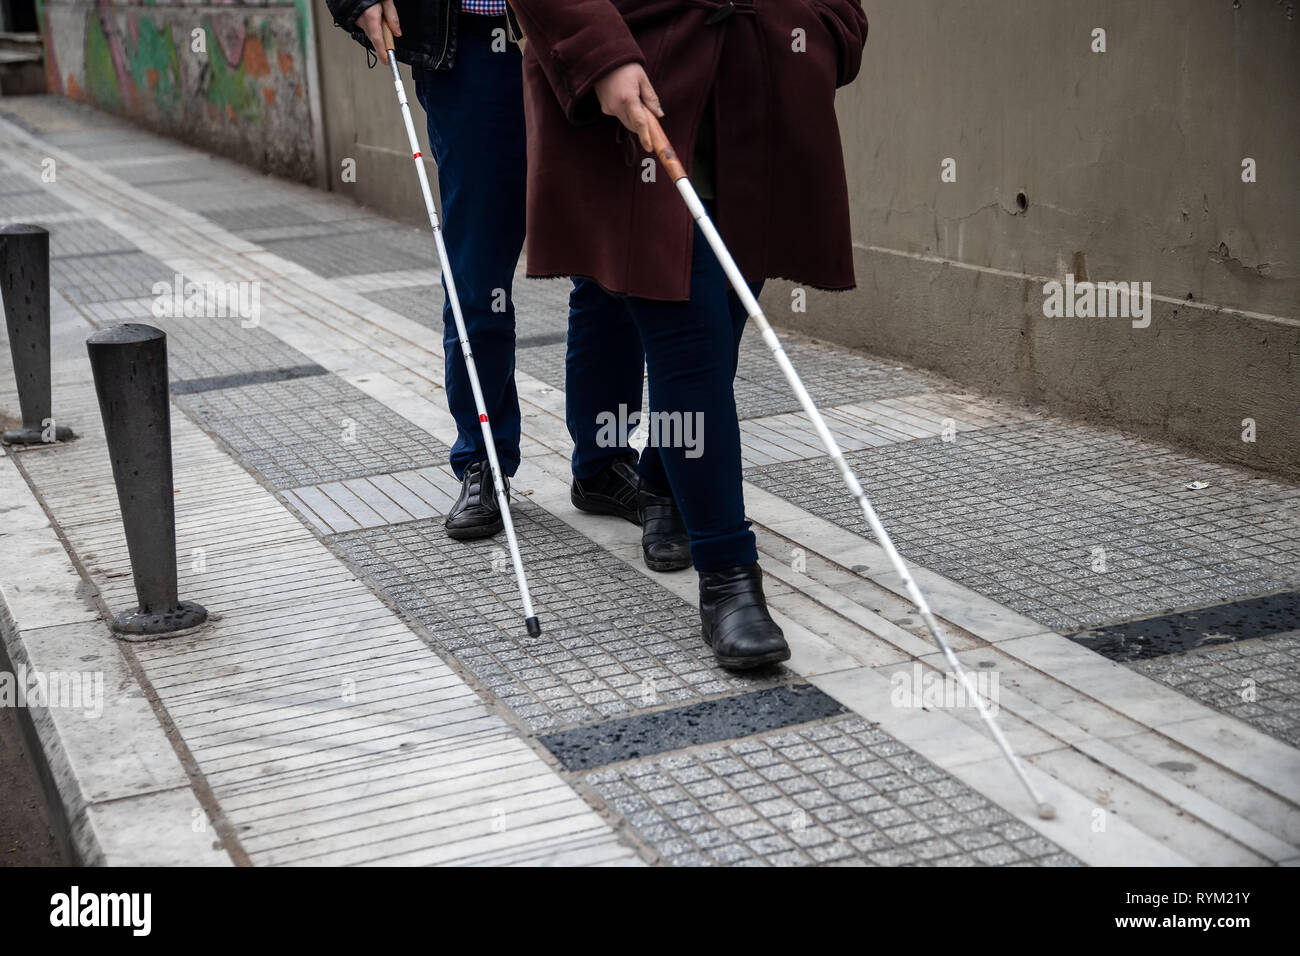 Blind man and woman walking on the street en utilisant une canne blanche Banque D'Images